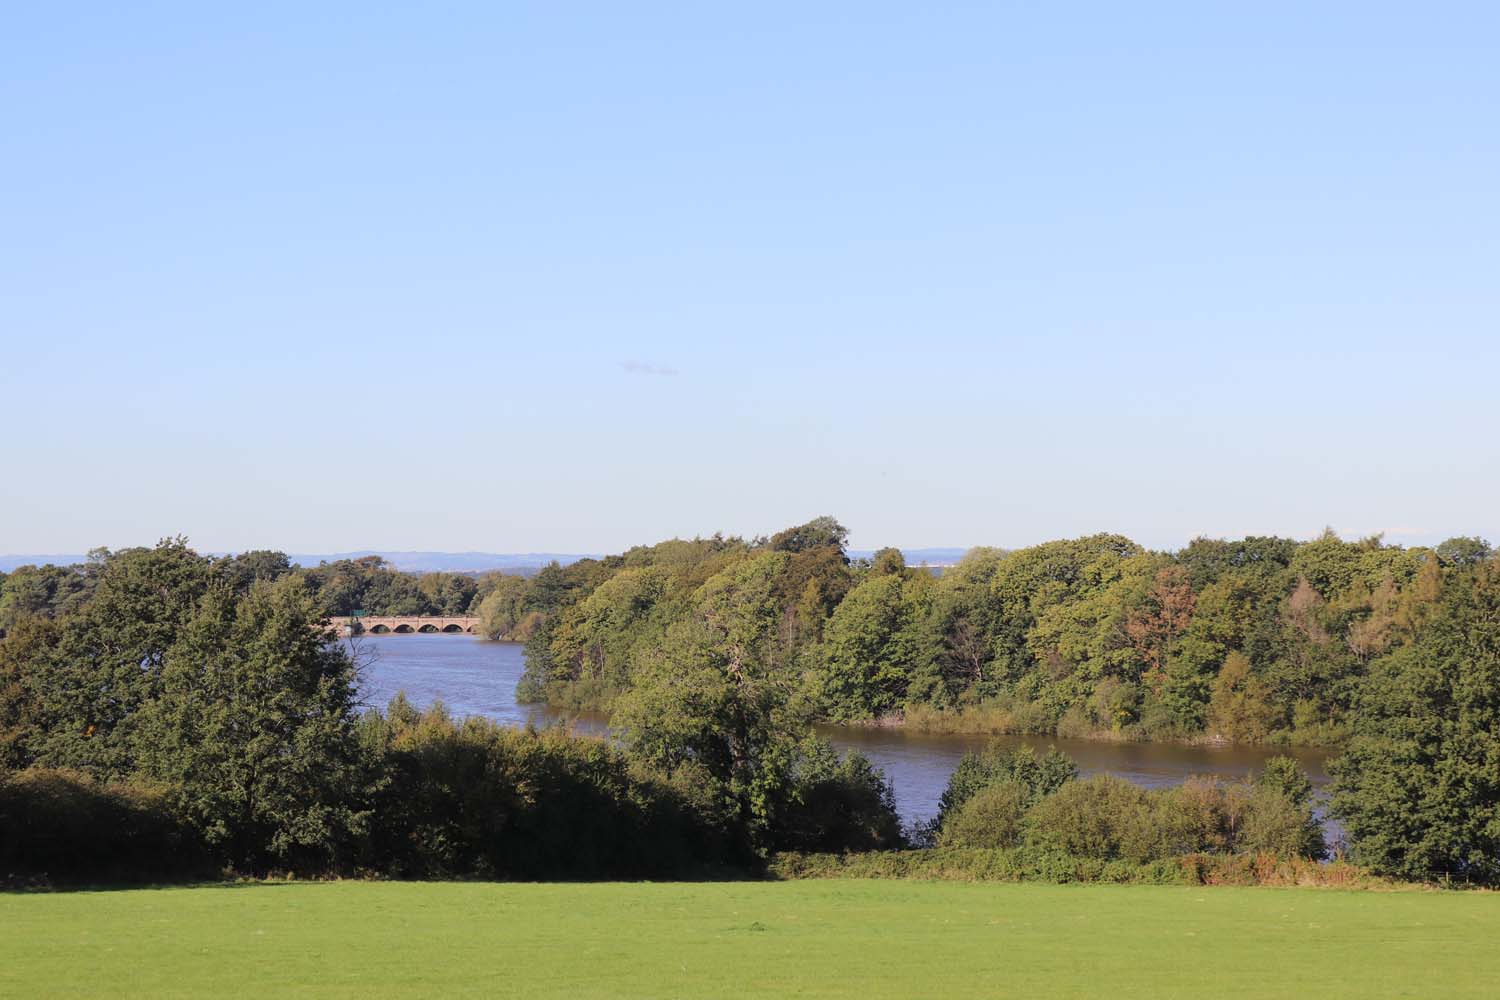 A view over Blackbrook Reservoir. The water is surrounded by trees. A bridge is visible in the distance.